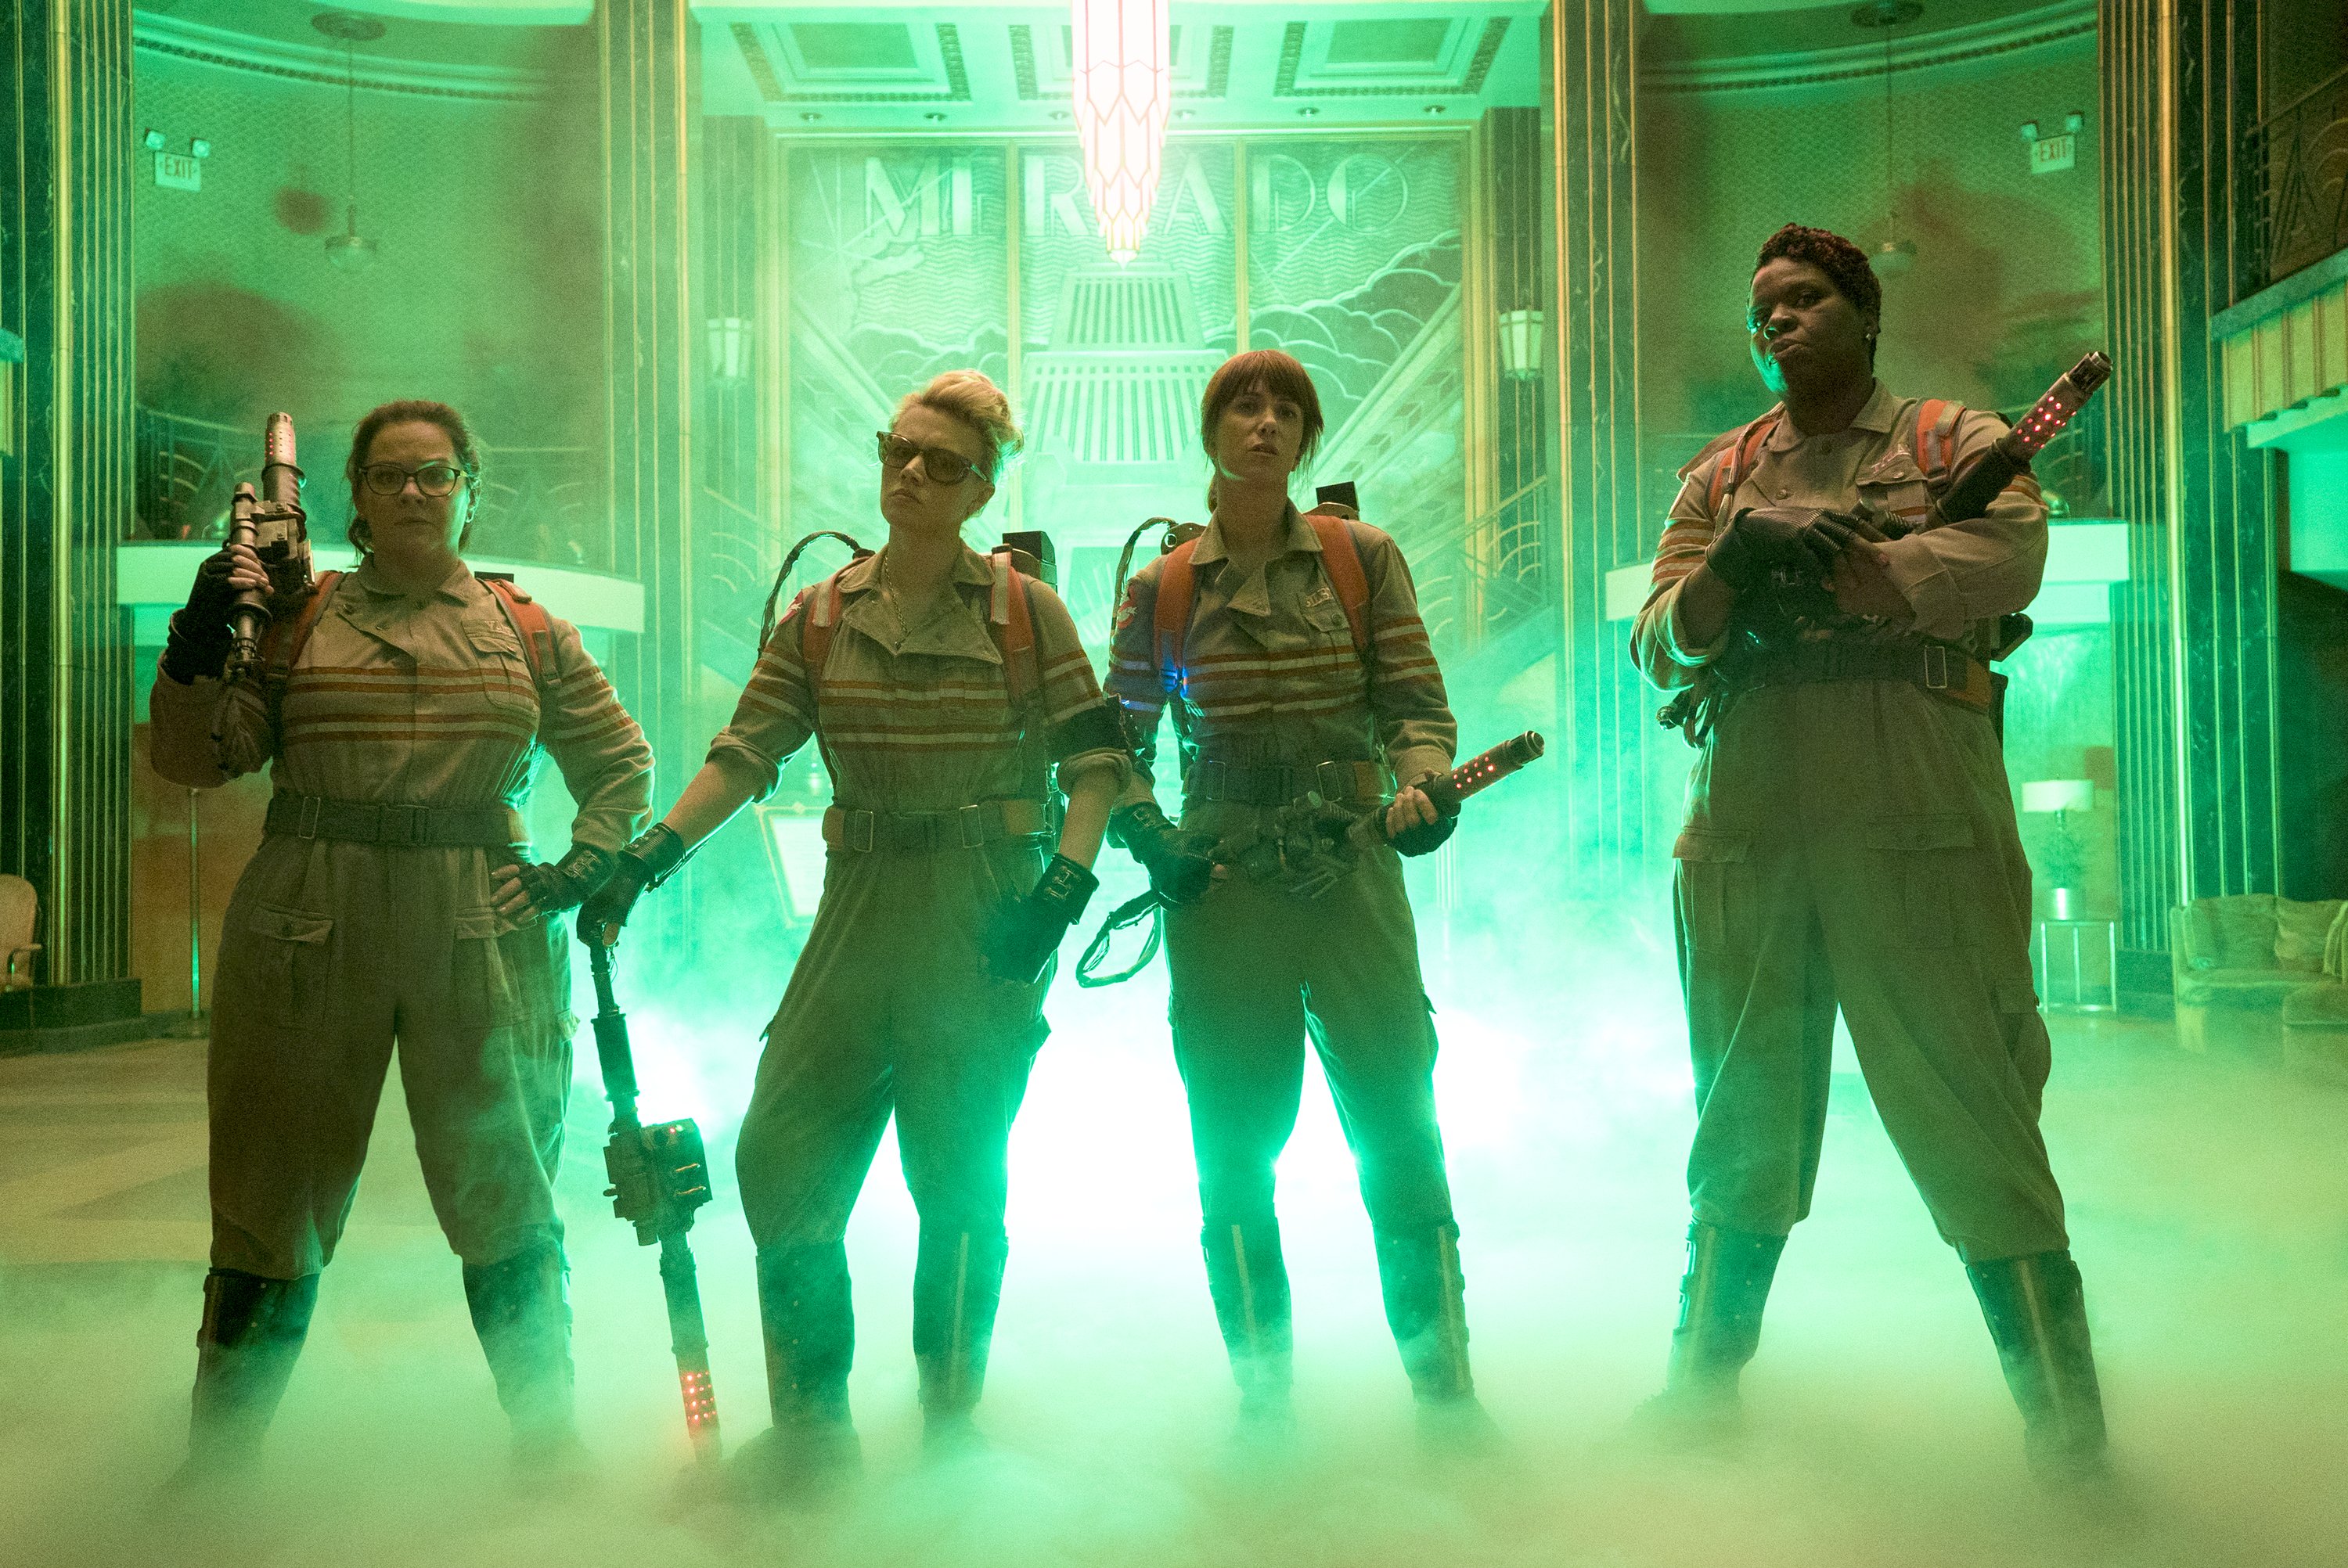 Activision confirmed a new Ghostbusters game will hit gaming shelves on July 12 in North America and July 15 in Europe. The game is set to be released alongside the franchise's upcoming movie. Now, here's what is currently known about 2016 Ghostbusters game release date, rumors, and updates.